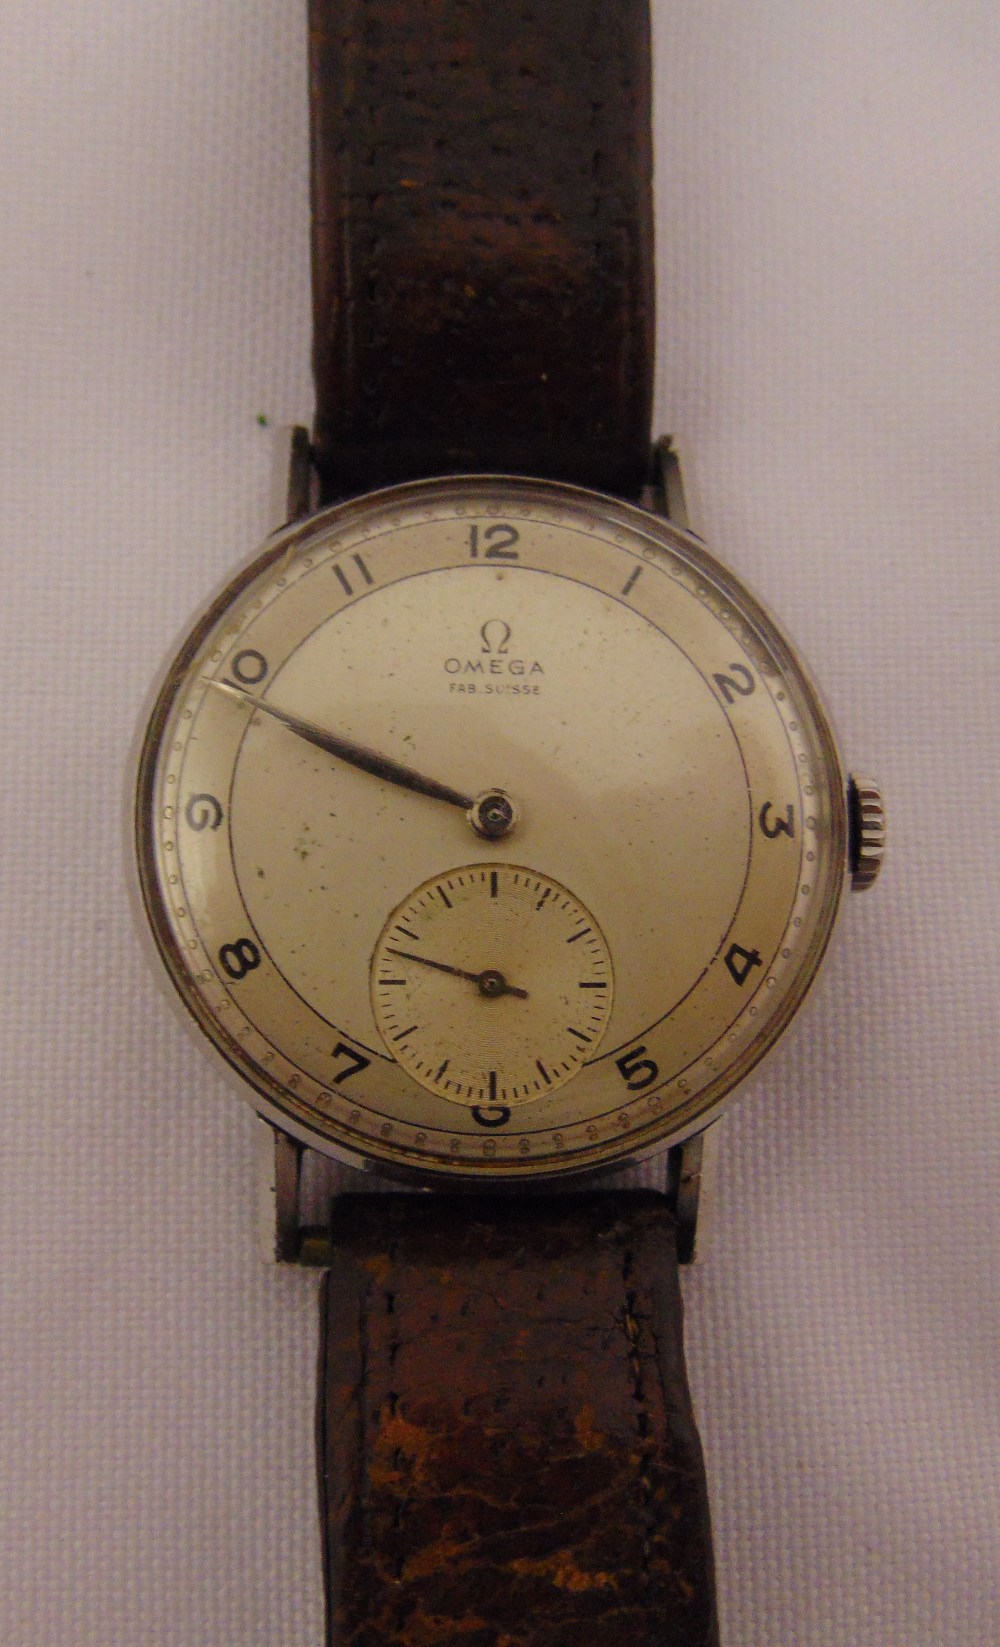 Omega gentlemans vintage wristwatch with Arabic numerals and subsidiary seconds dial